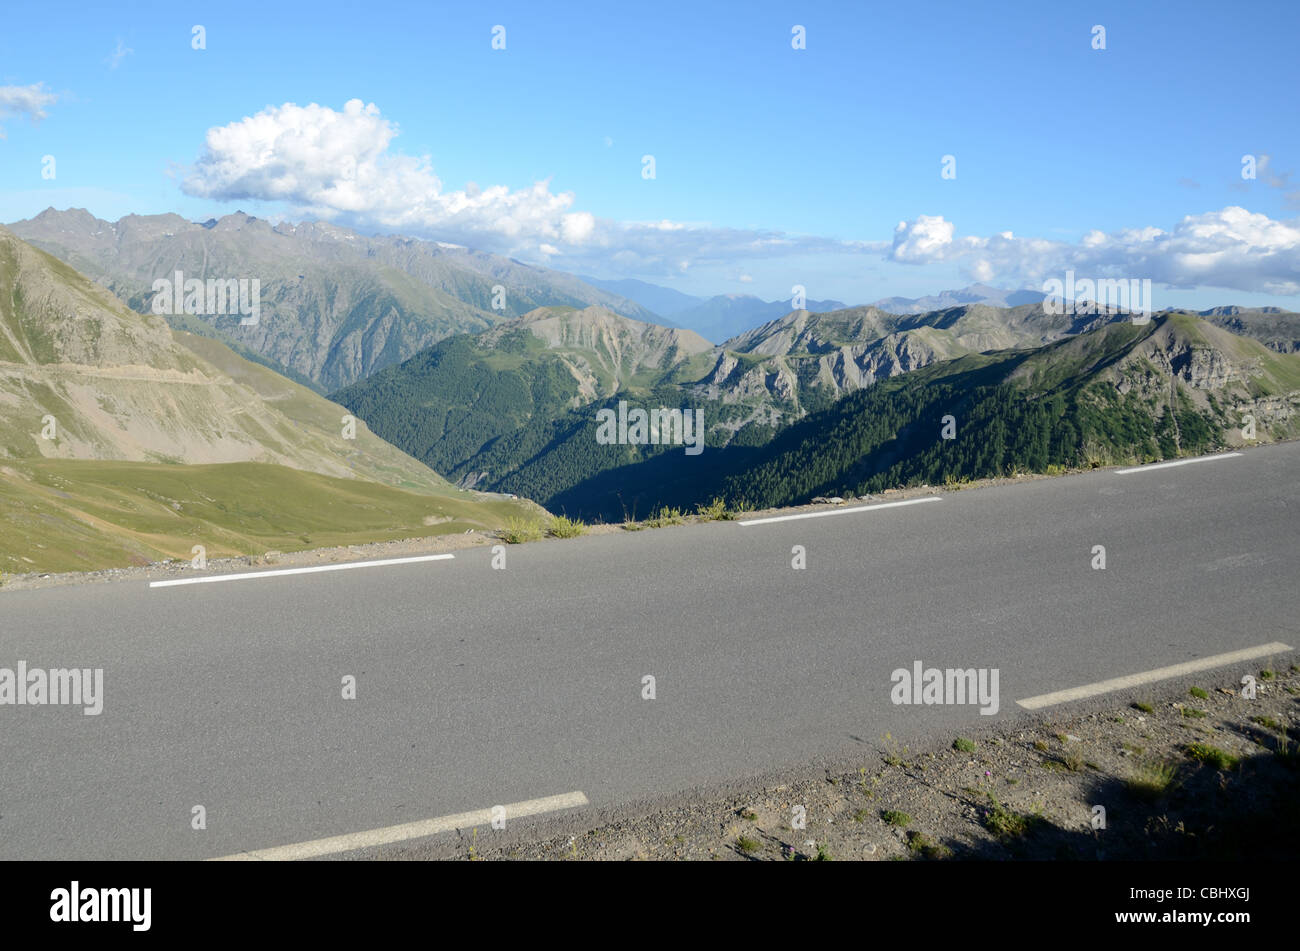 Deserted Alpine Road, Route de la Bonette, one of the Highest Roads in Europe, French Alps, France Stock Photo